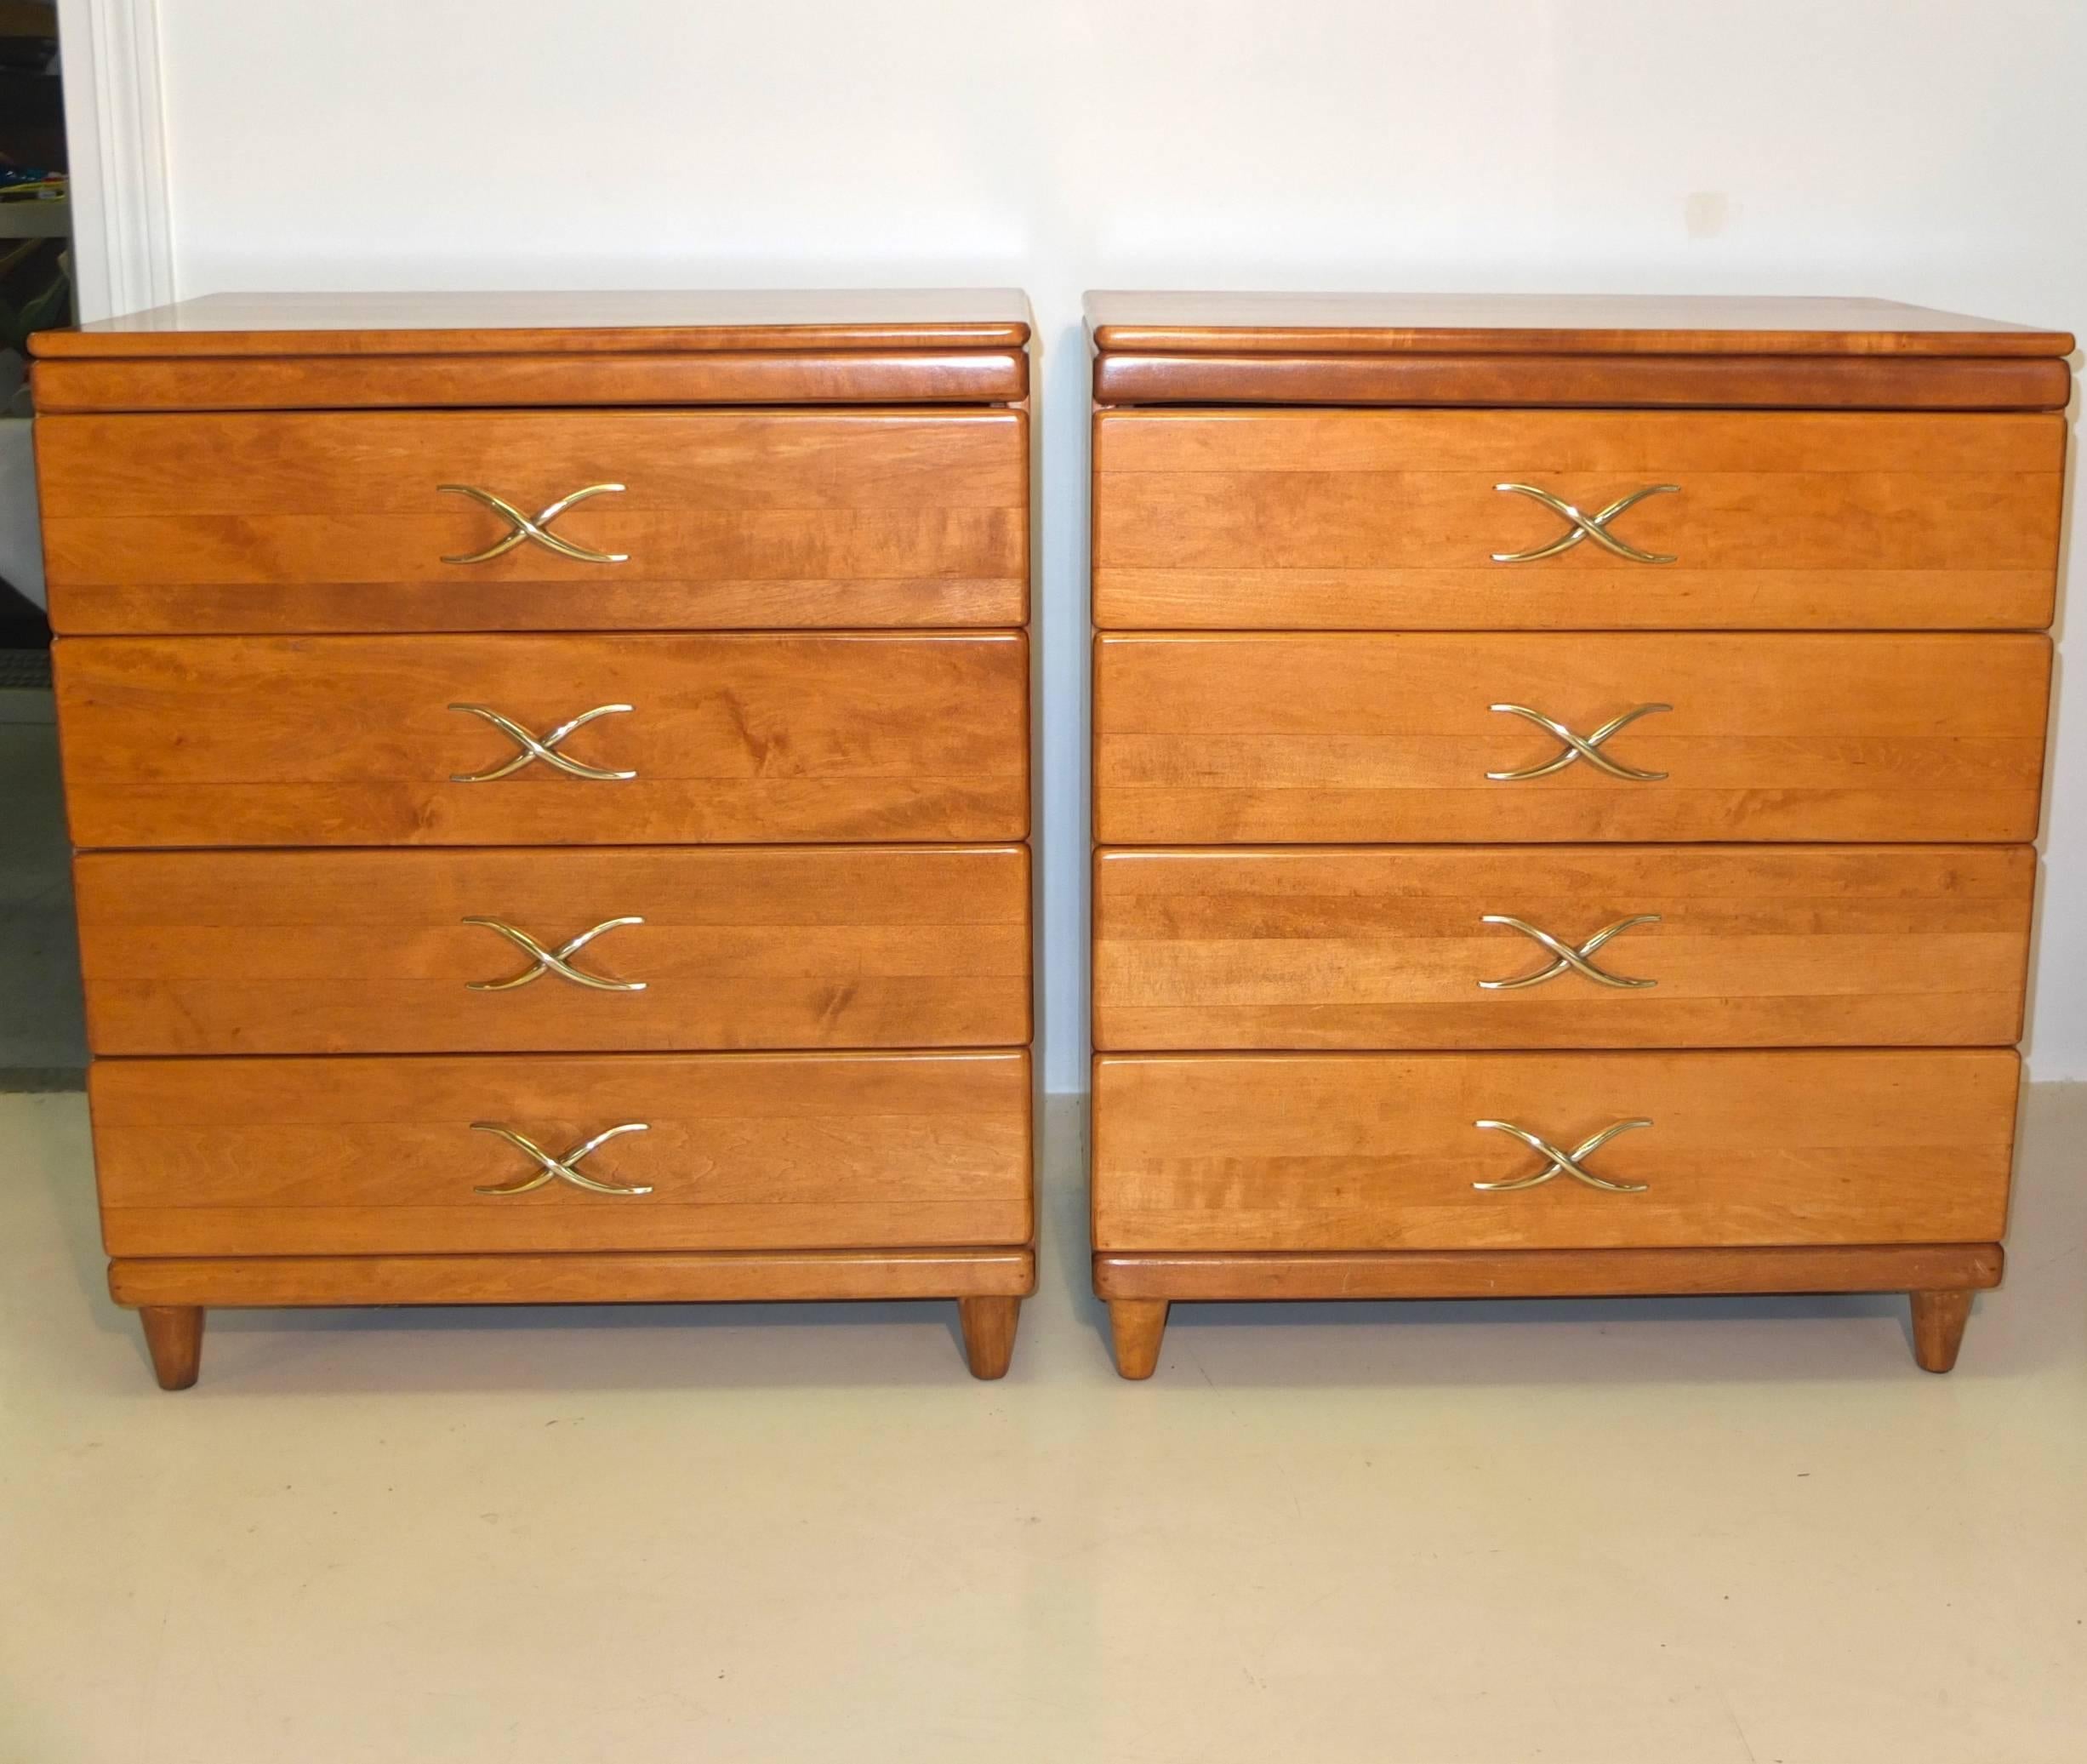 HOLIDAY SALE 27 November through 15 December 2023

Pair of 1950s four-drawer chests with distinctive polished brass 